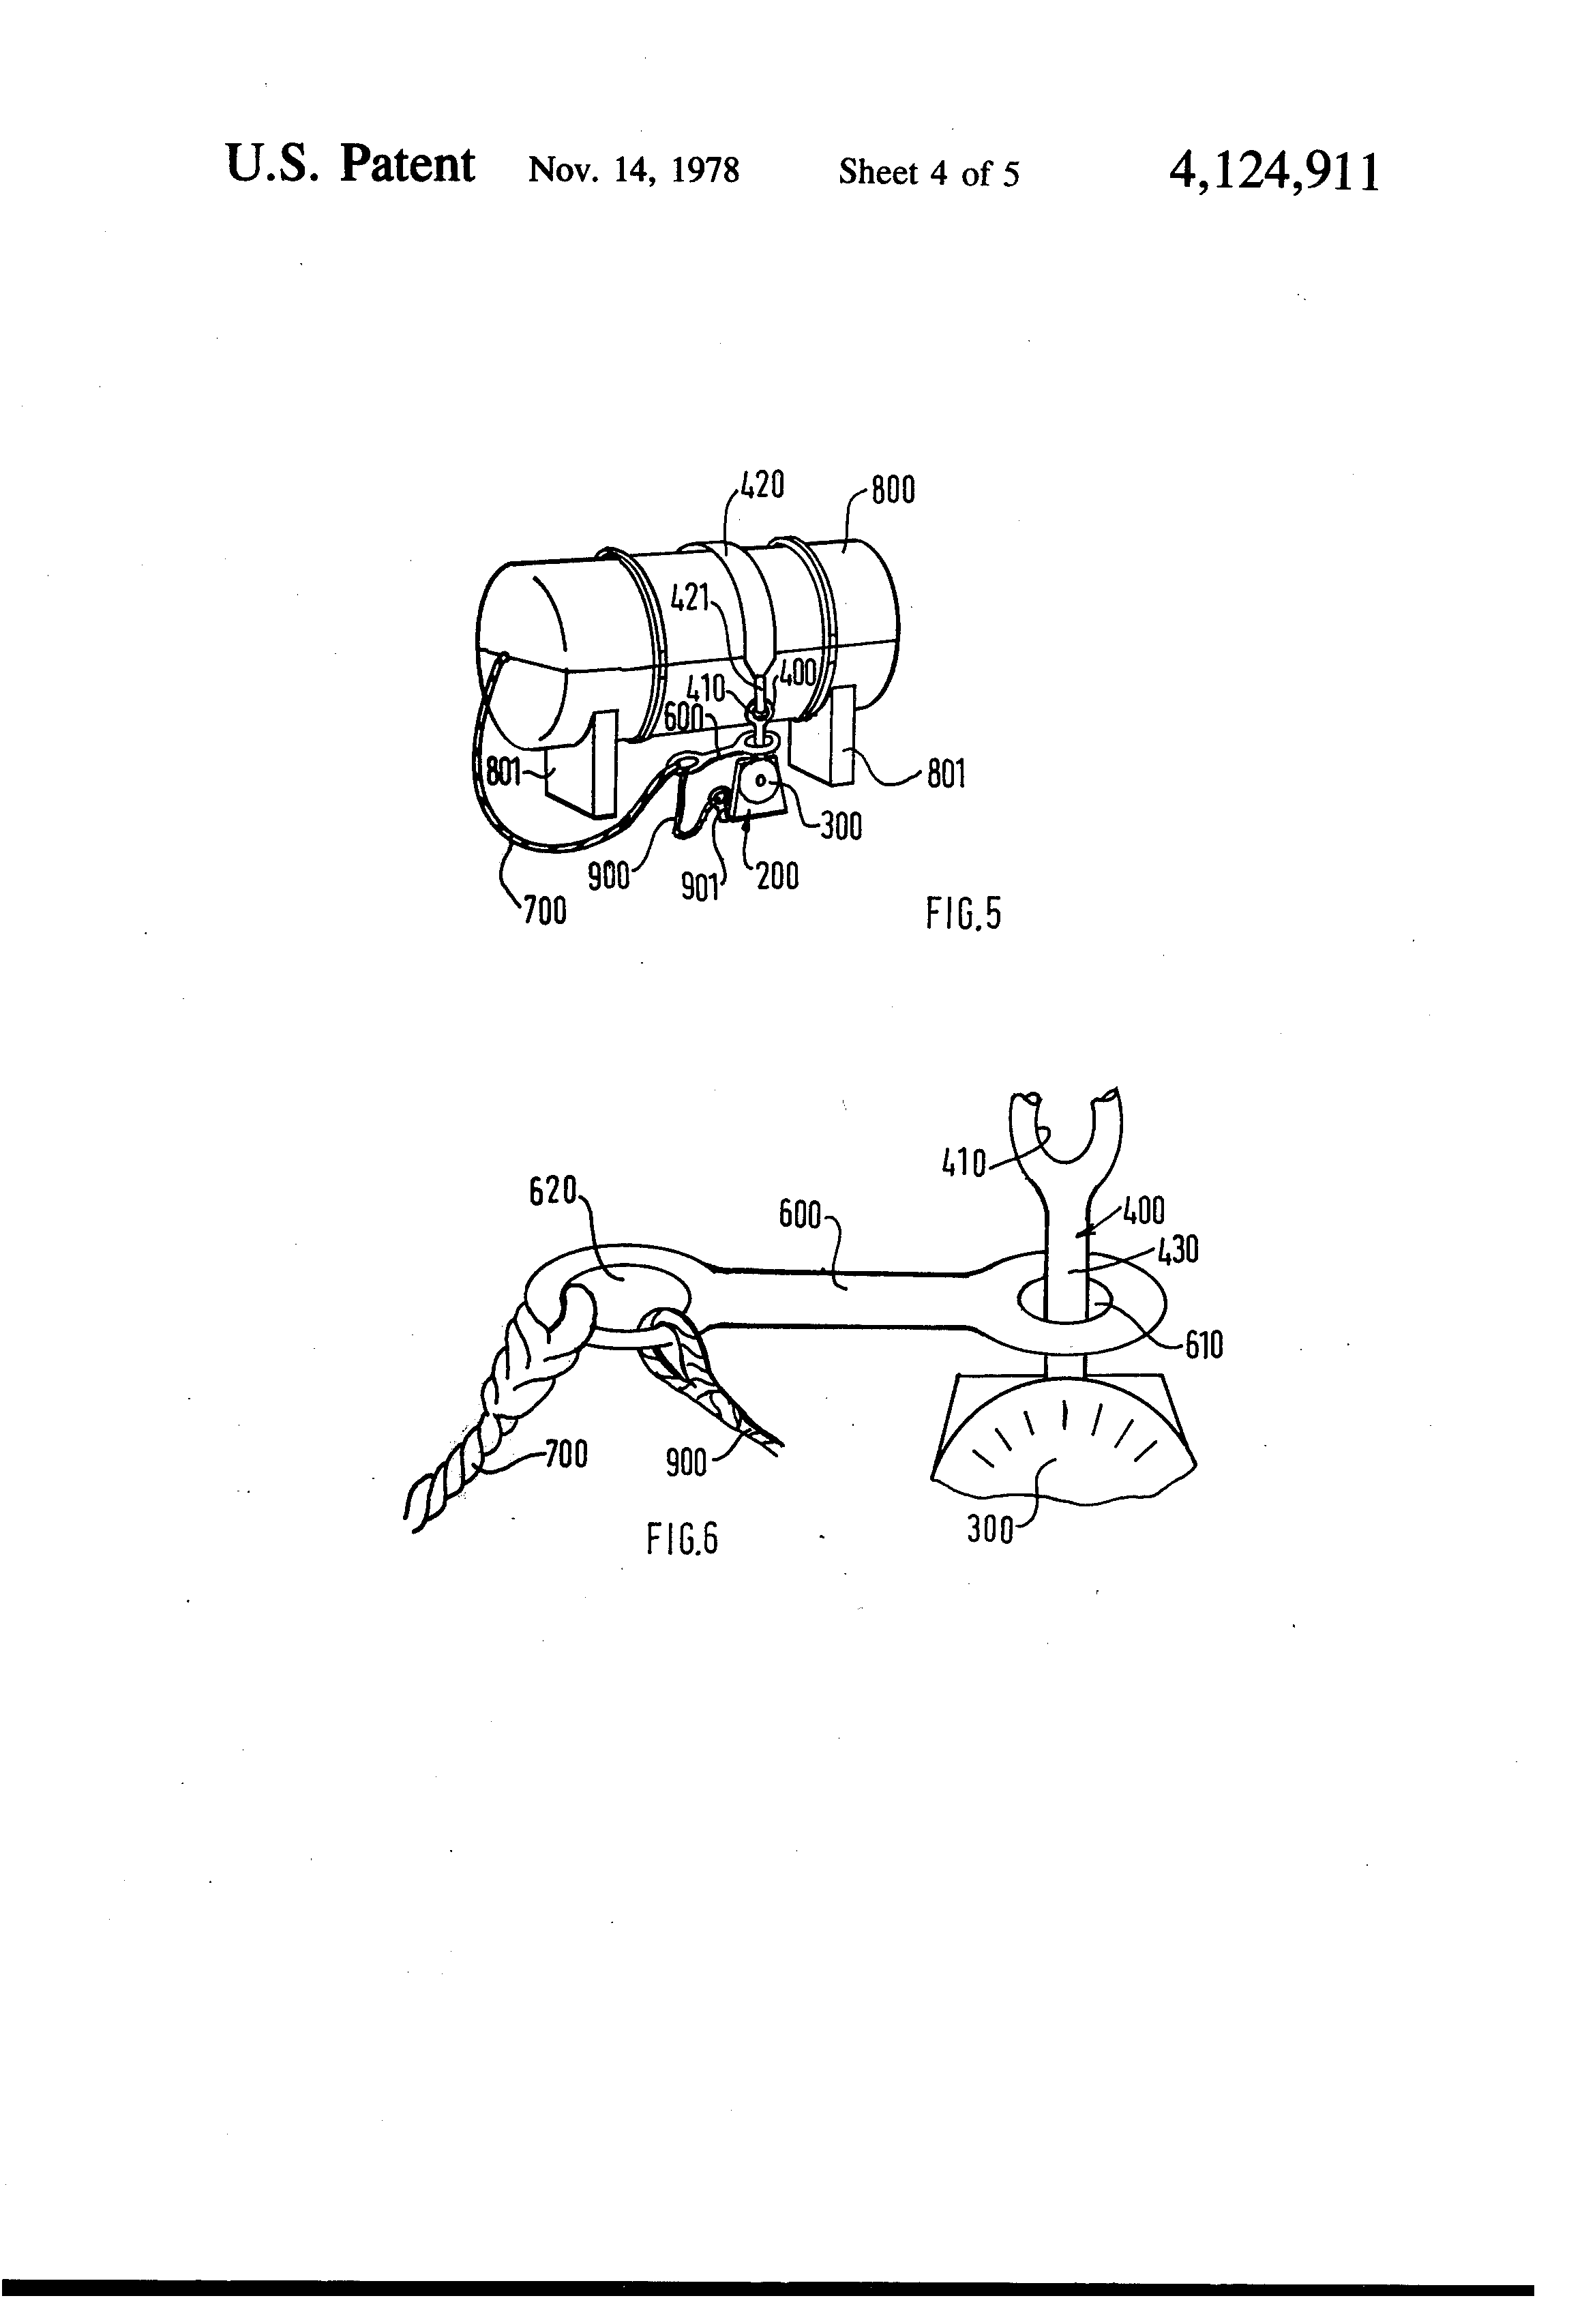 Early hydrostatic release unit design patented in 1976